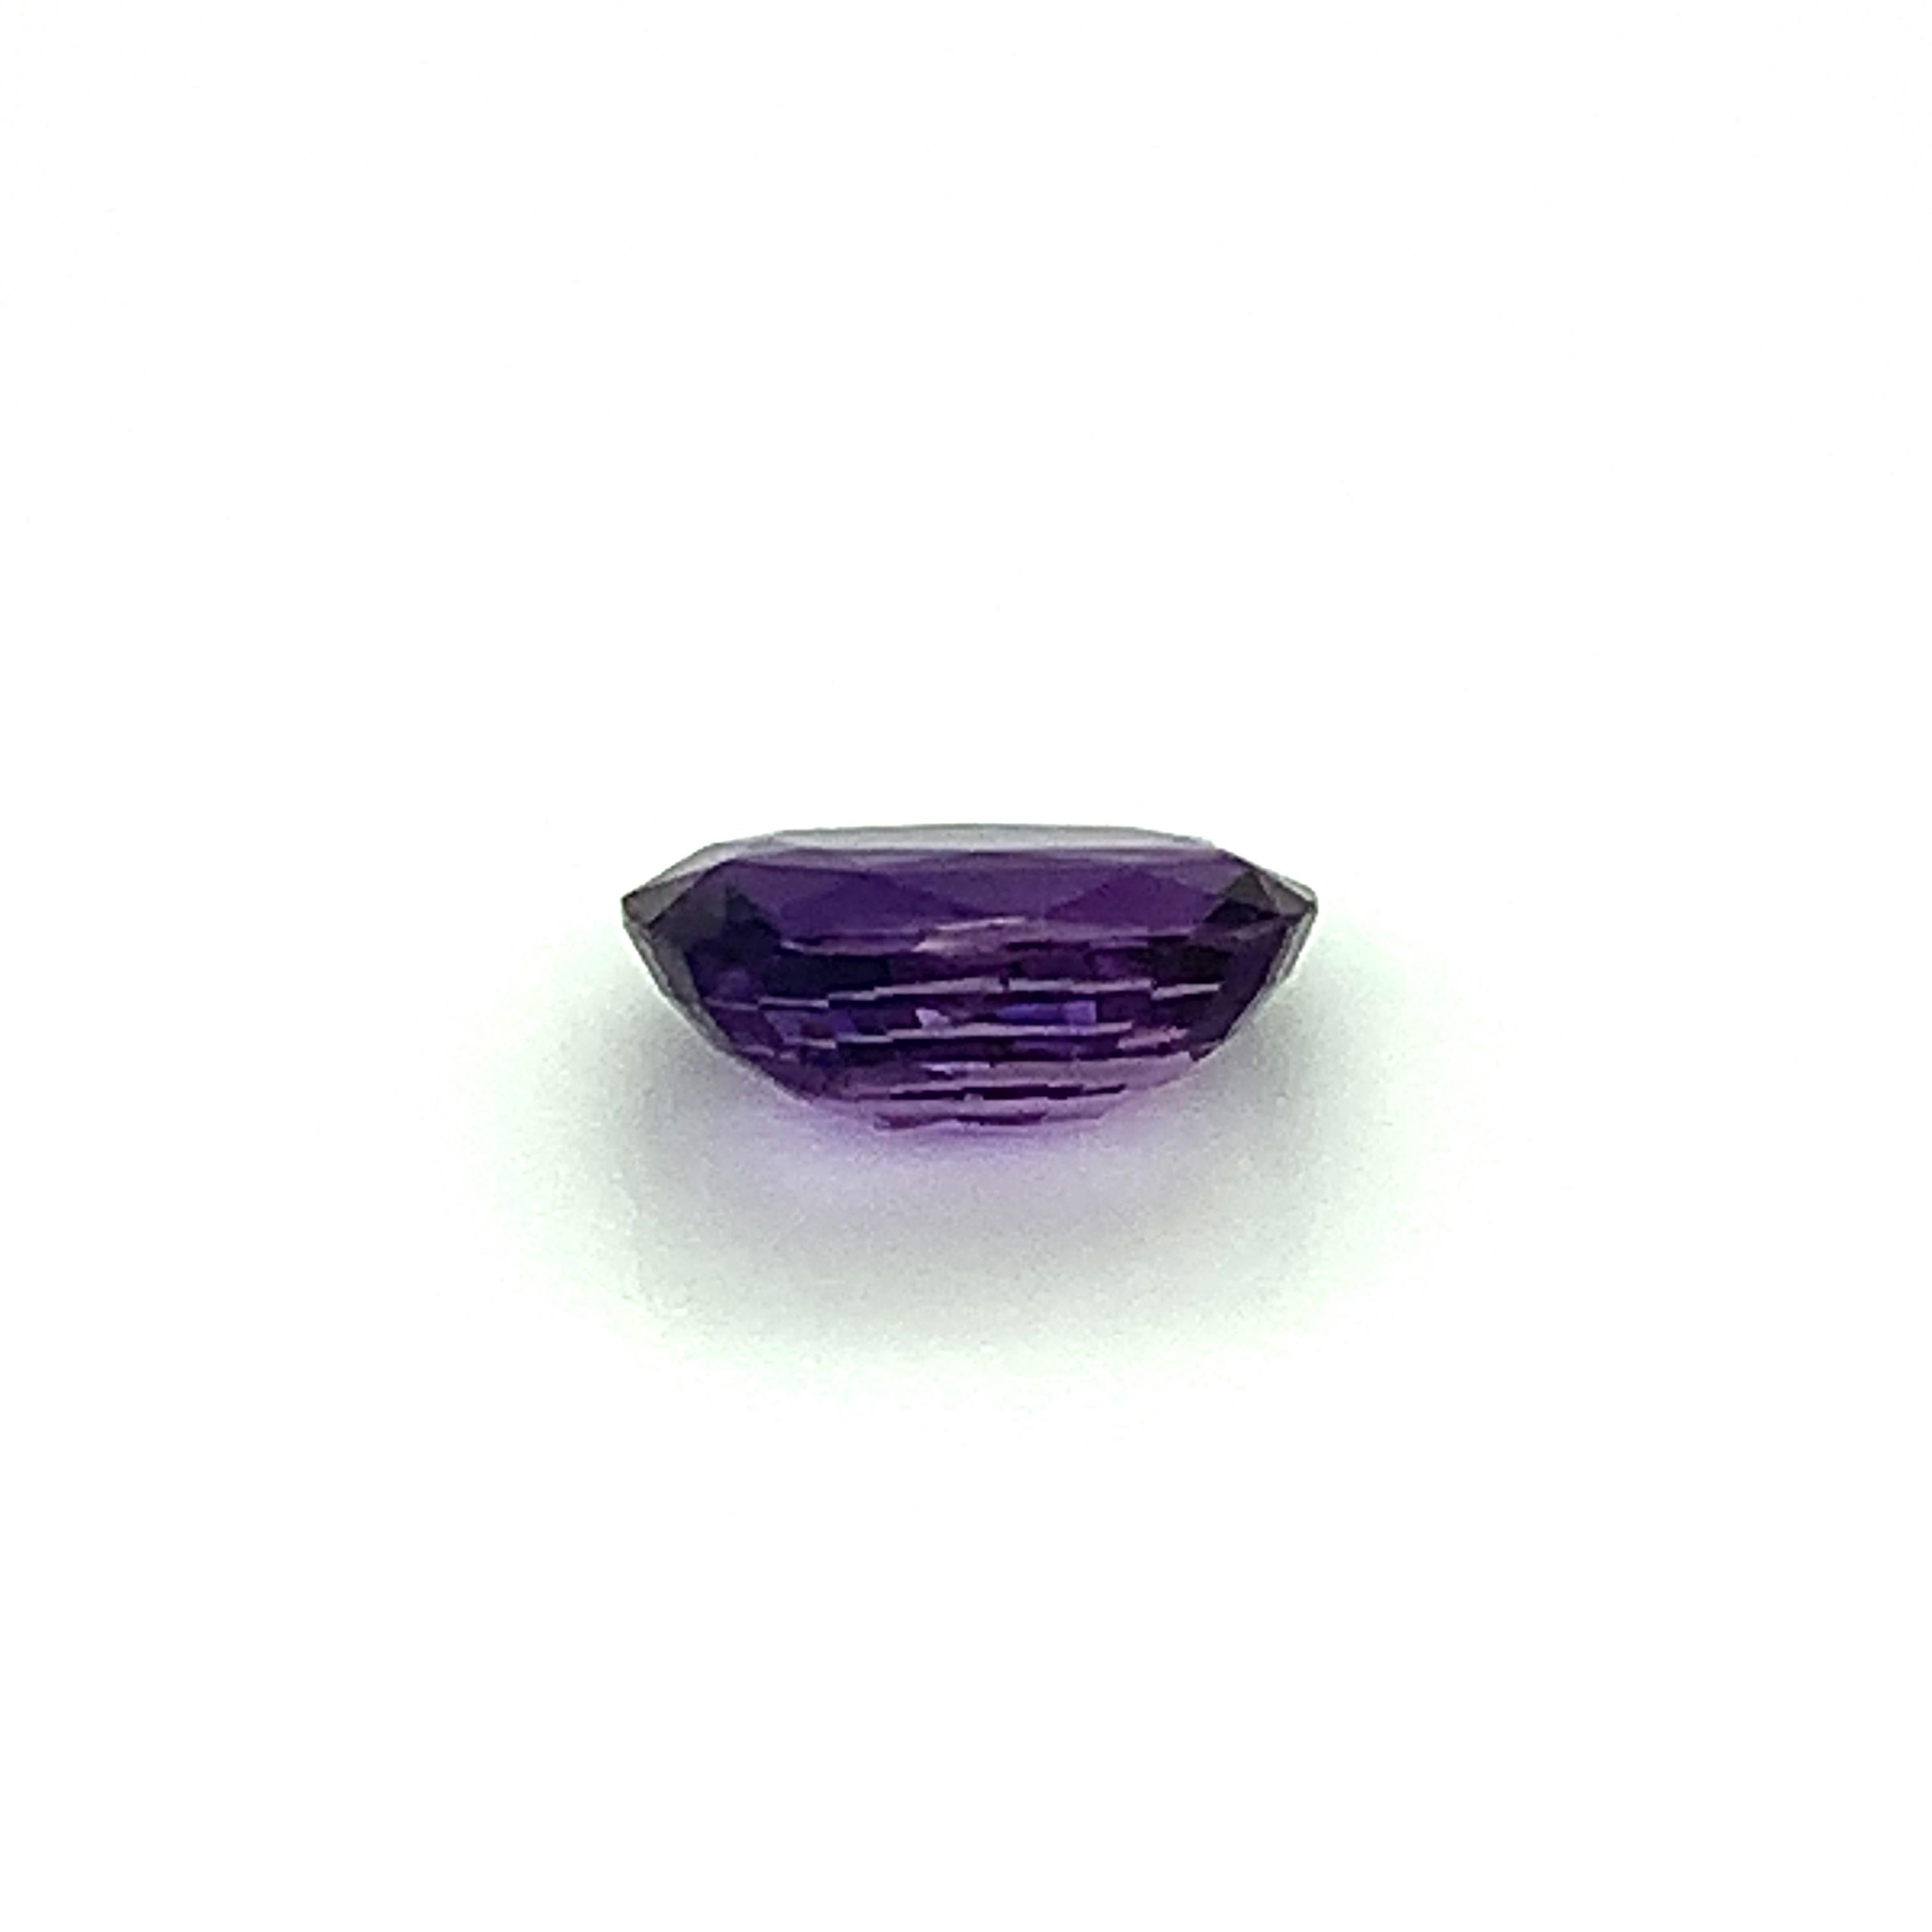 Unheated 3.50 Carat Color Change Sapphire, Unset Loose Gemstone, GIA Certified For Sale 2